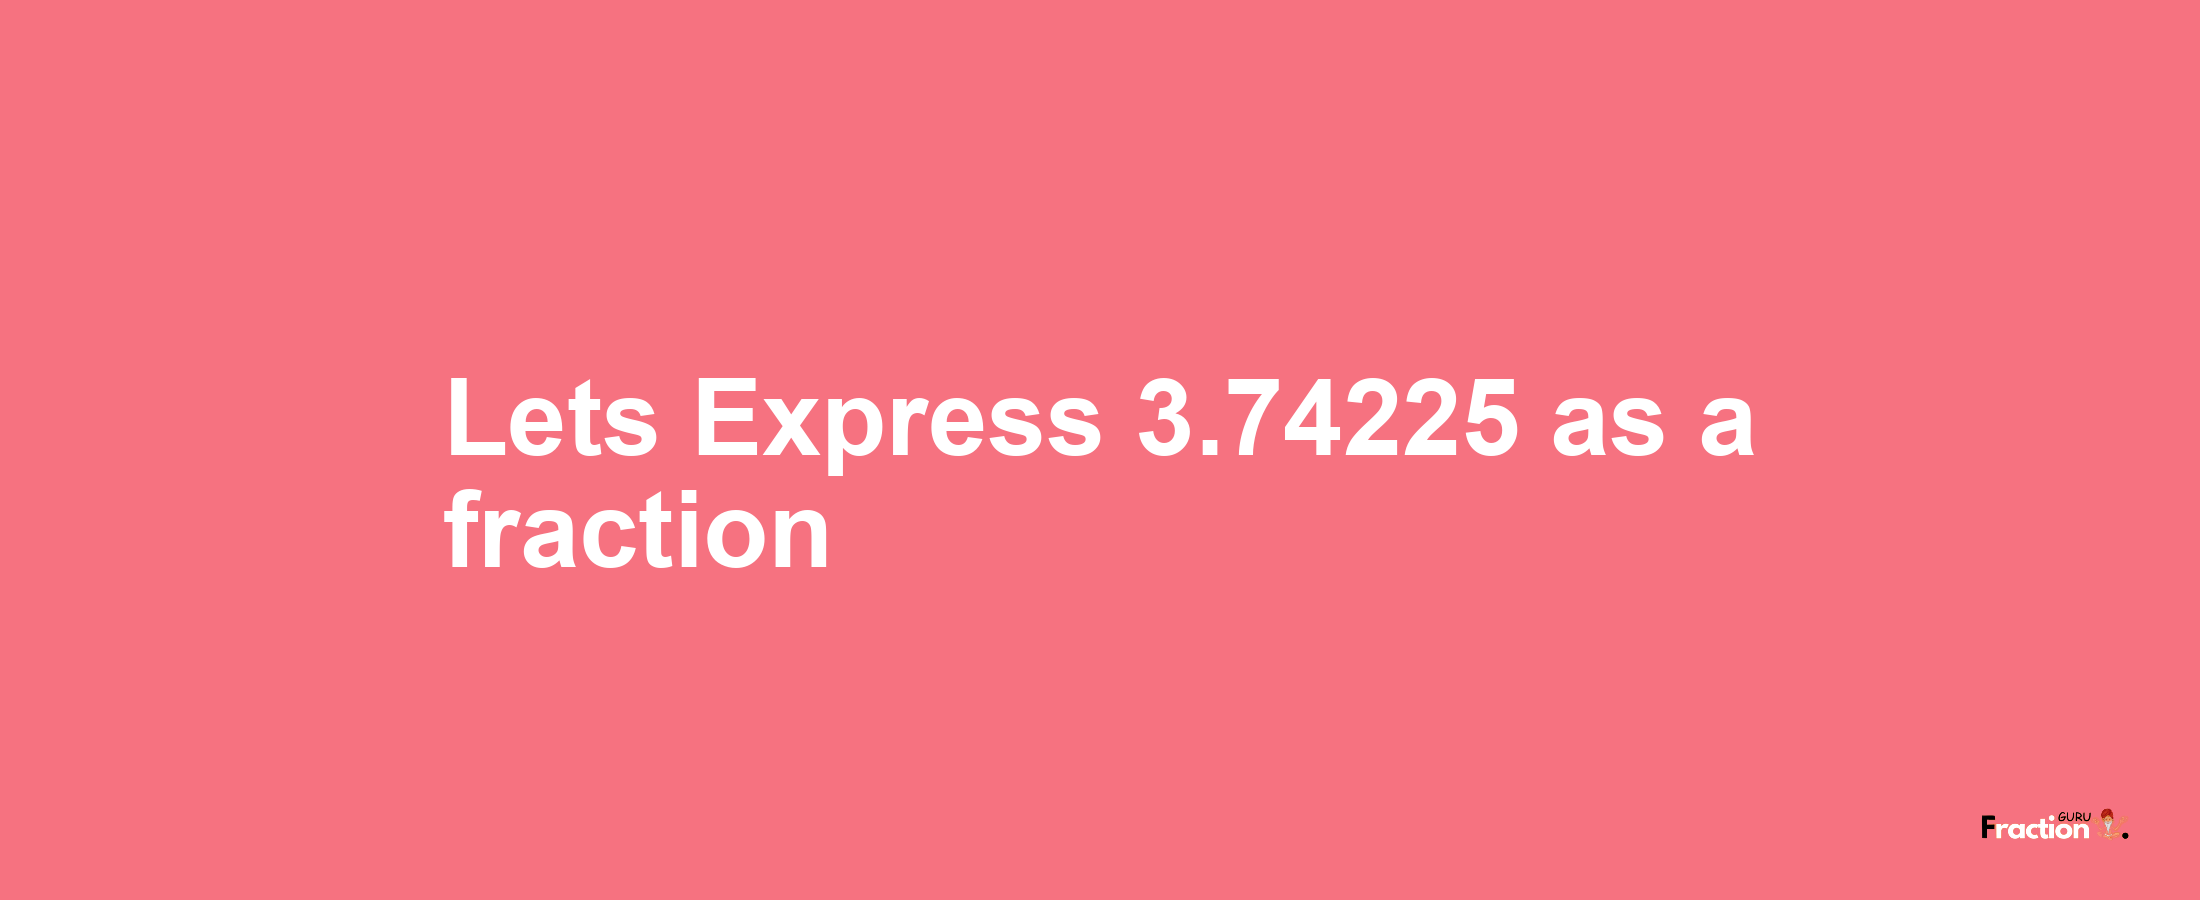 Lets Express 3.74225 as afraction